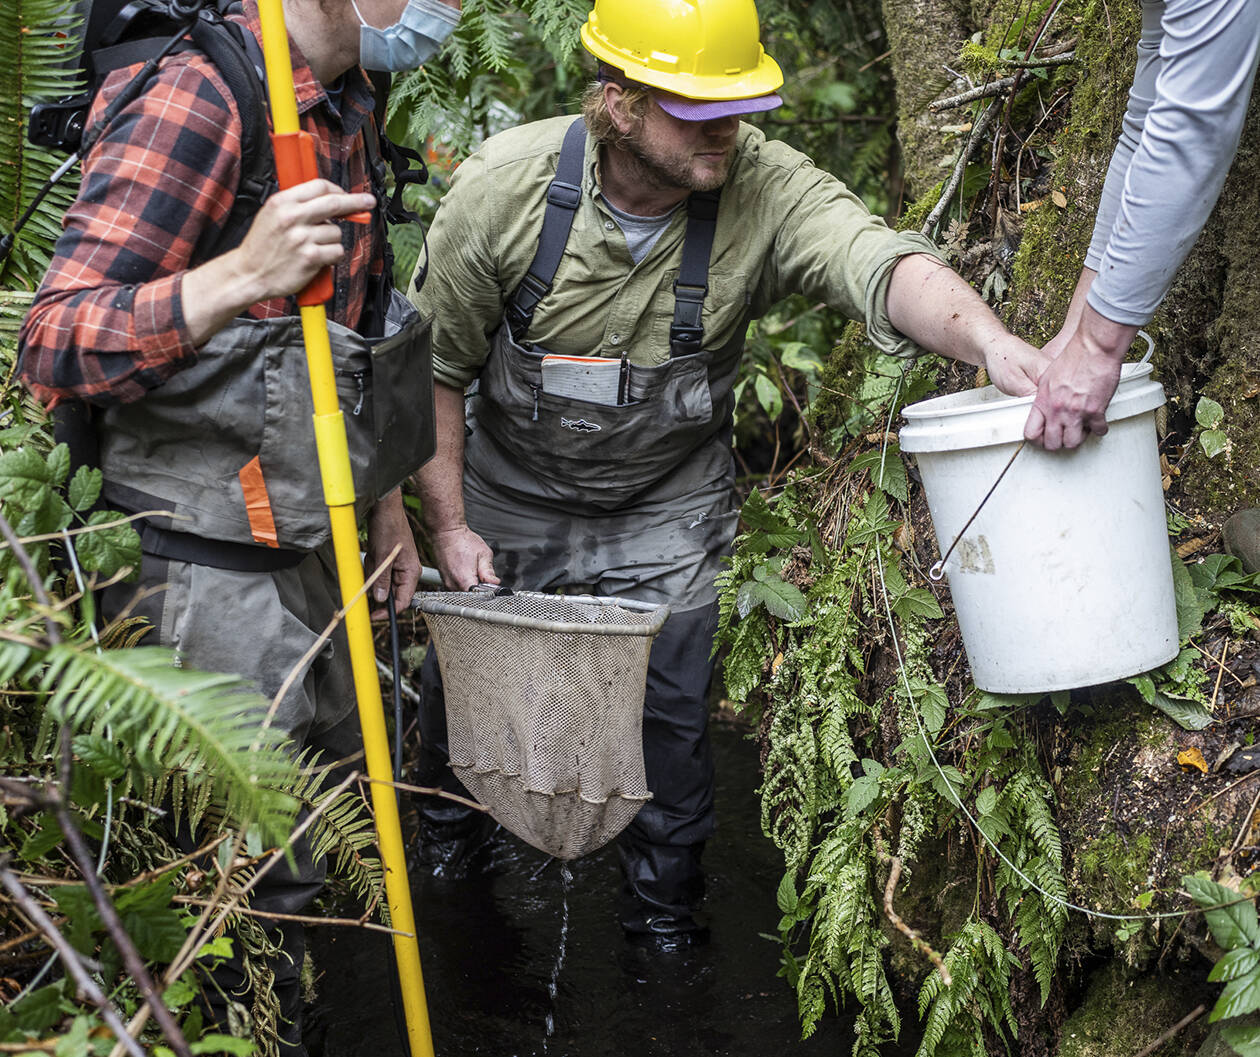 Scientists from Wild Fish Conservancy safely reroute native fish upstream before removal of the culvert barrier.